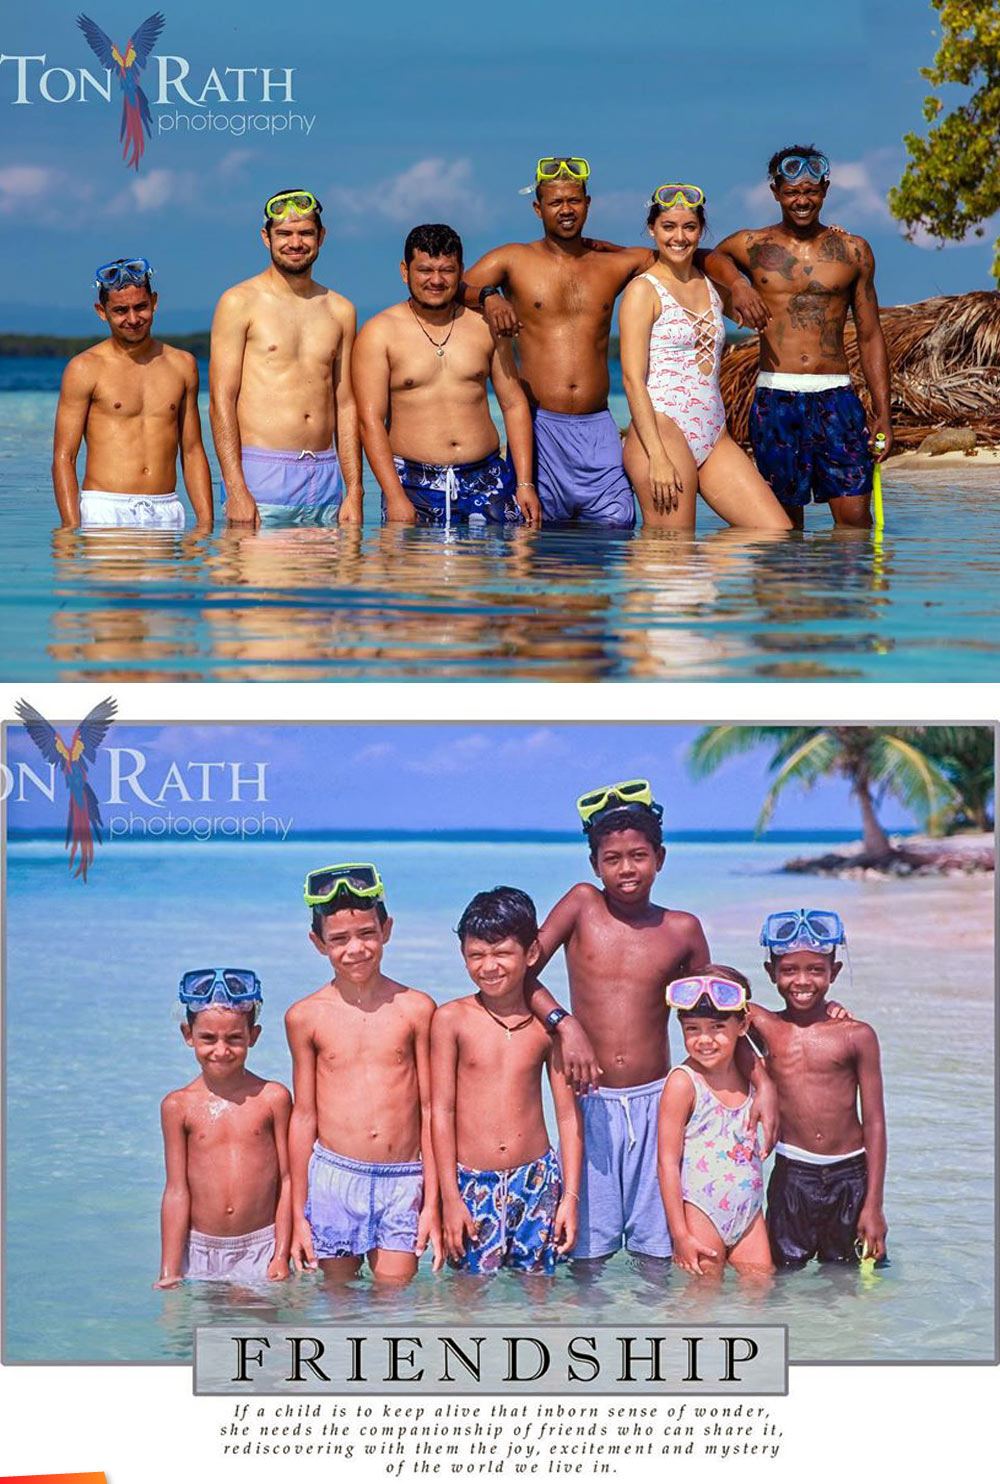 Tony Rath's family remakes a family photo 20 years later, Southwater Caye